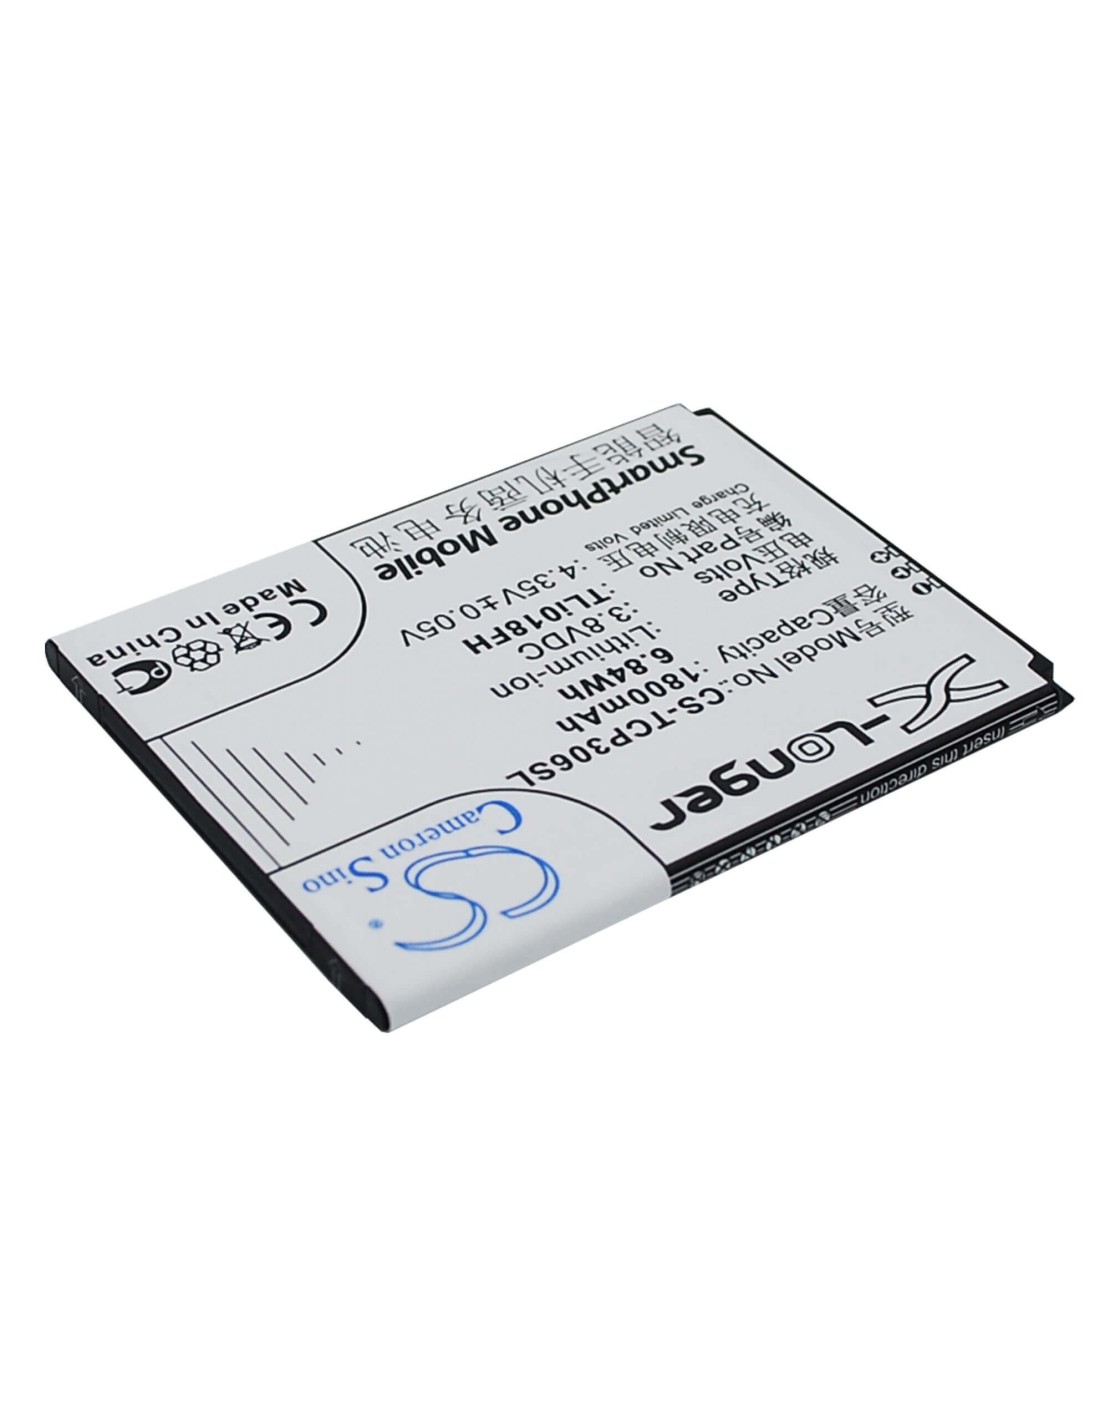 Battery for TCL P306C, J706T, P306W 3.8V, 1800mAh - 6.84Wh